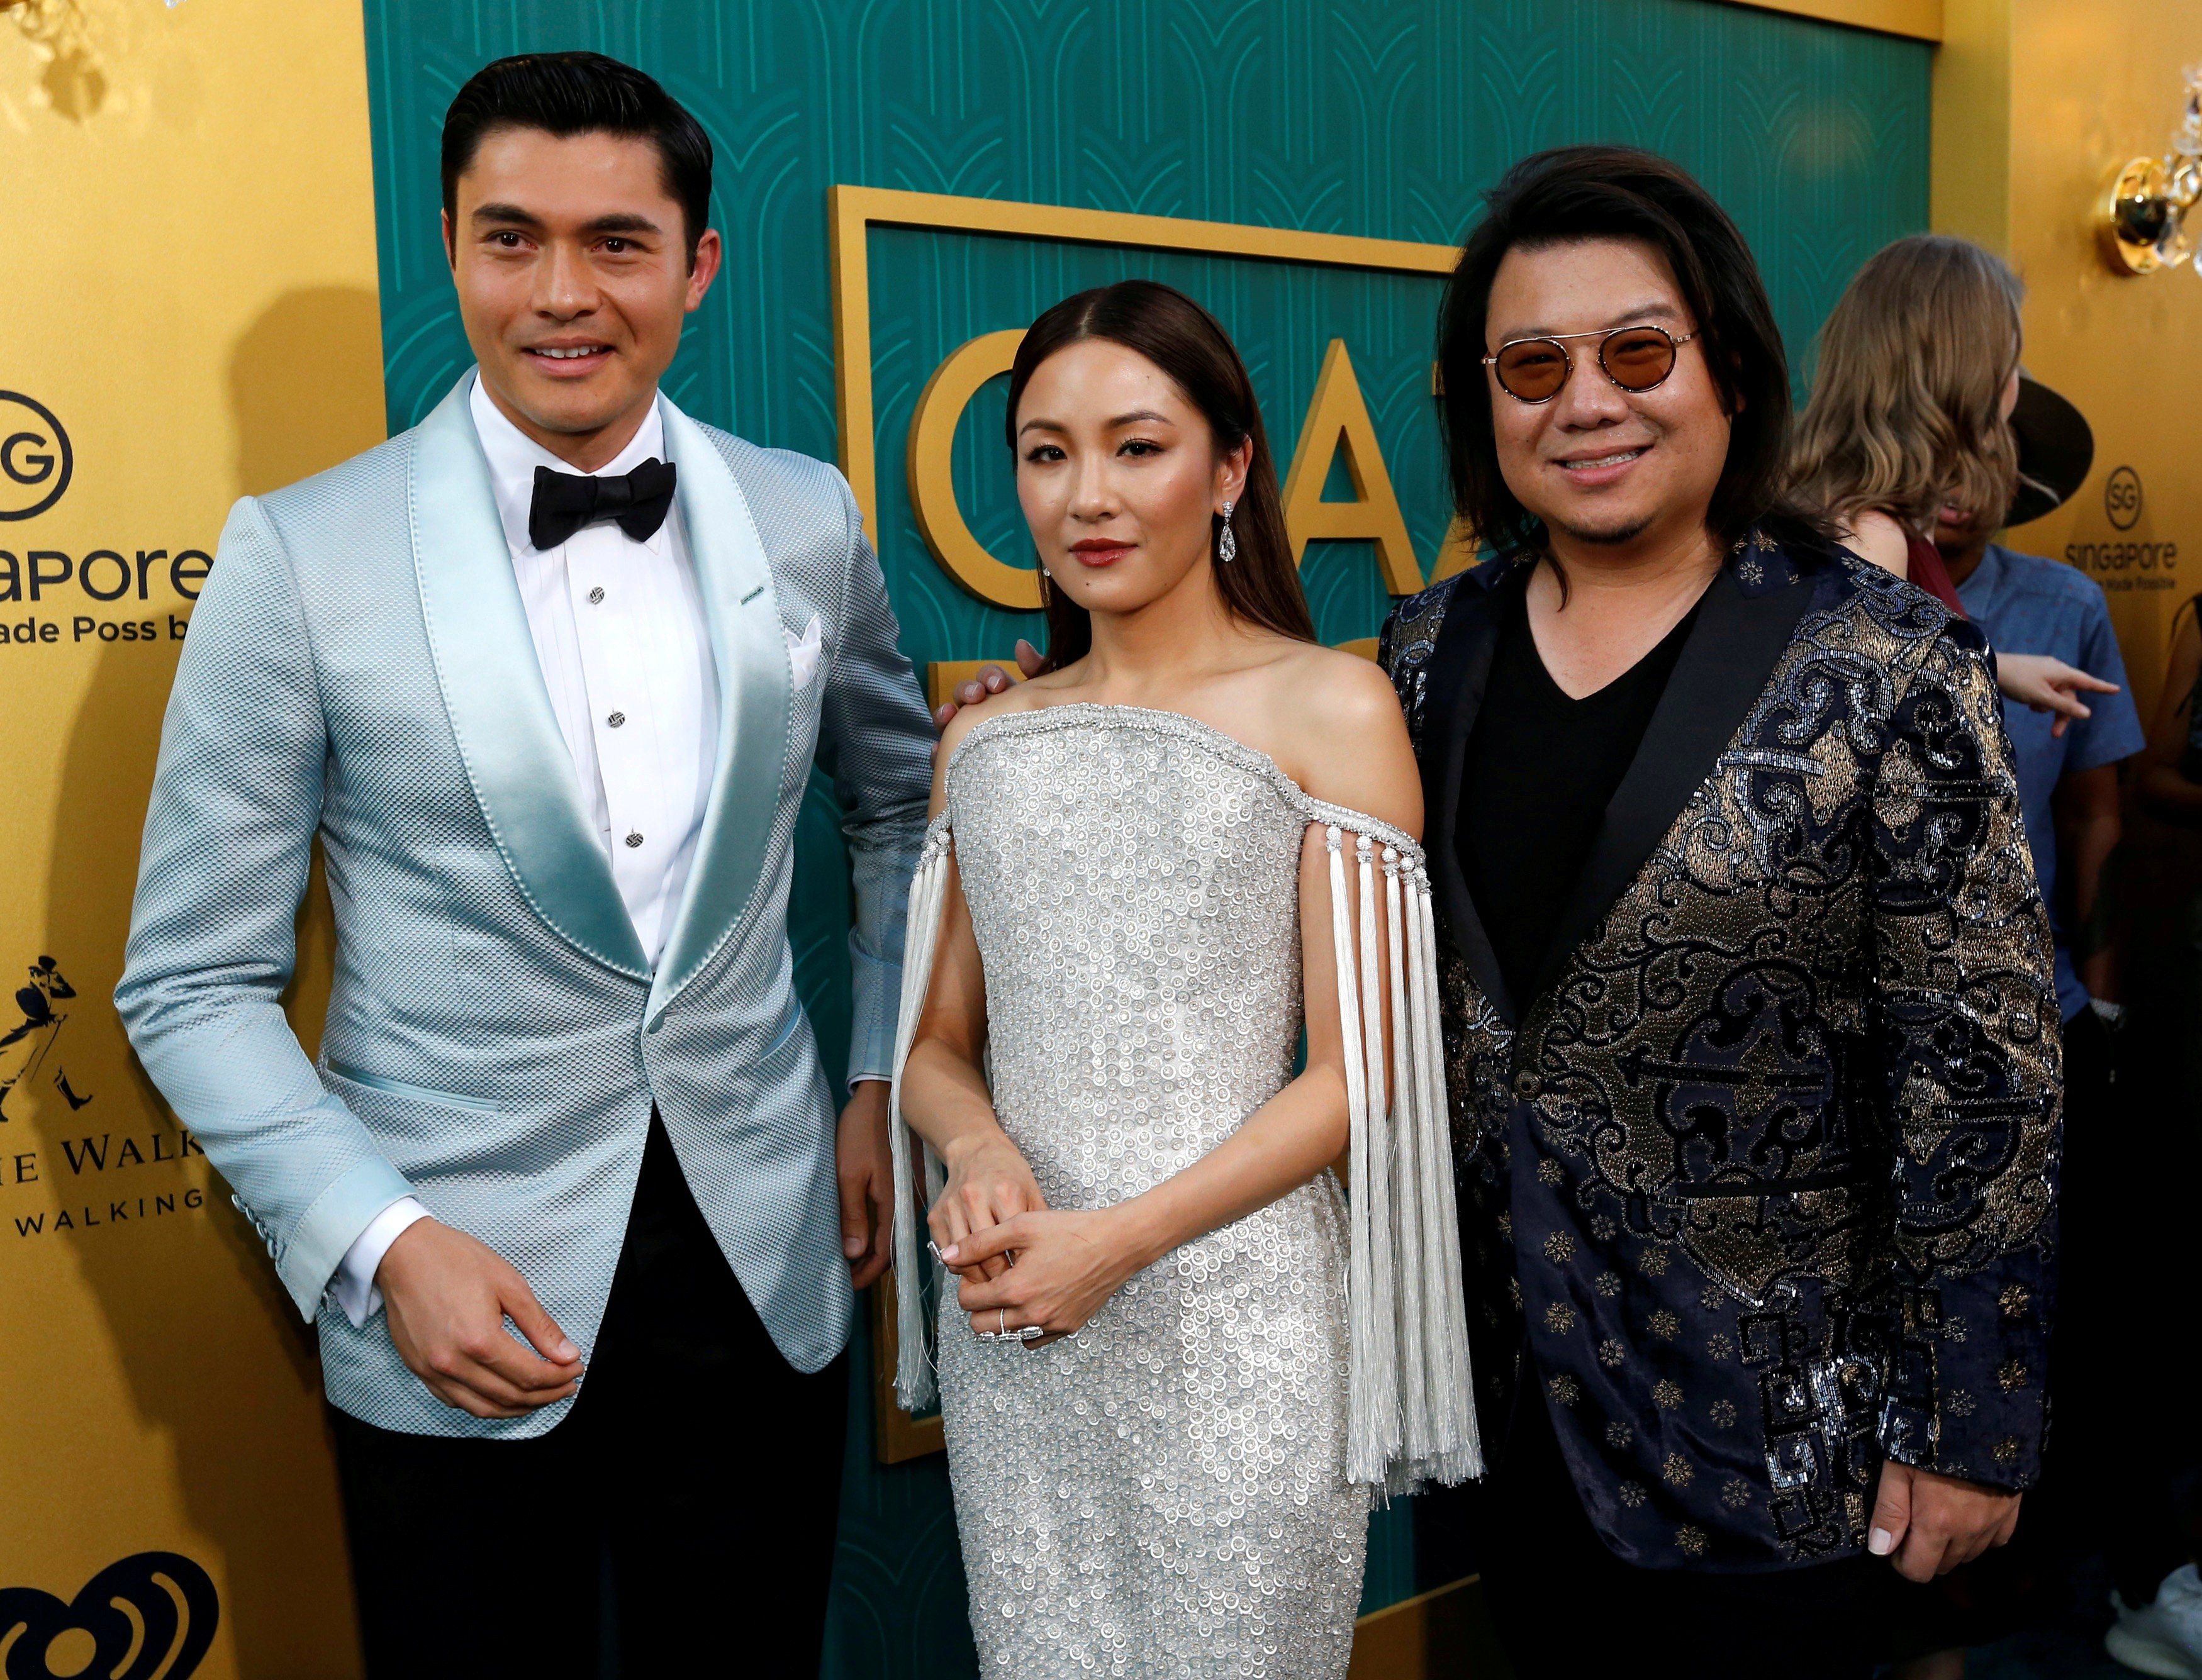 Kevin Kwan, right, author of the book Crazy Rich Asians, with the film adaptation’s cast members Henry Golding and Constance Wu, at its premiere in Los Angeles, California, on August 7. Why do Asians expect a film to represent all of them and even look to Hollywood to produce such a film? Photo: Reuters